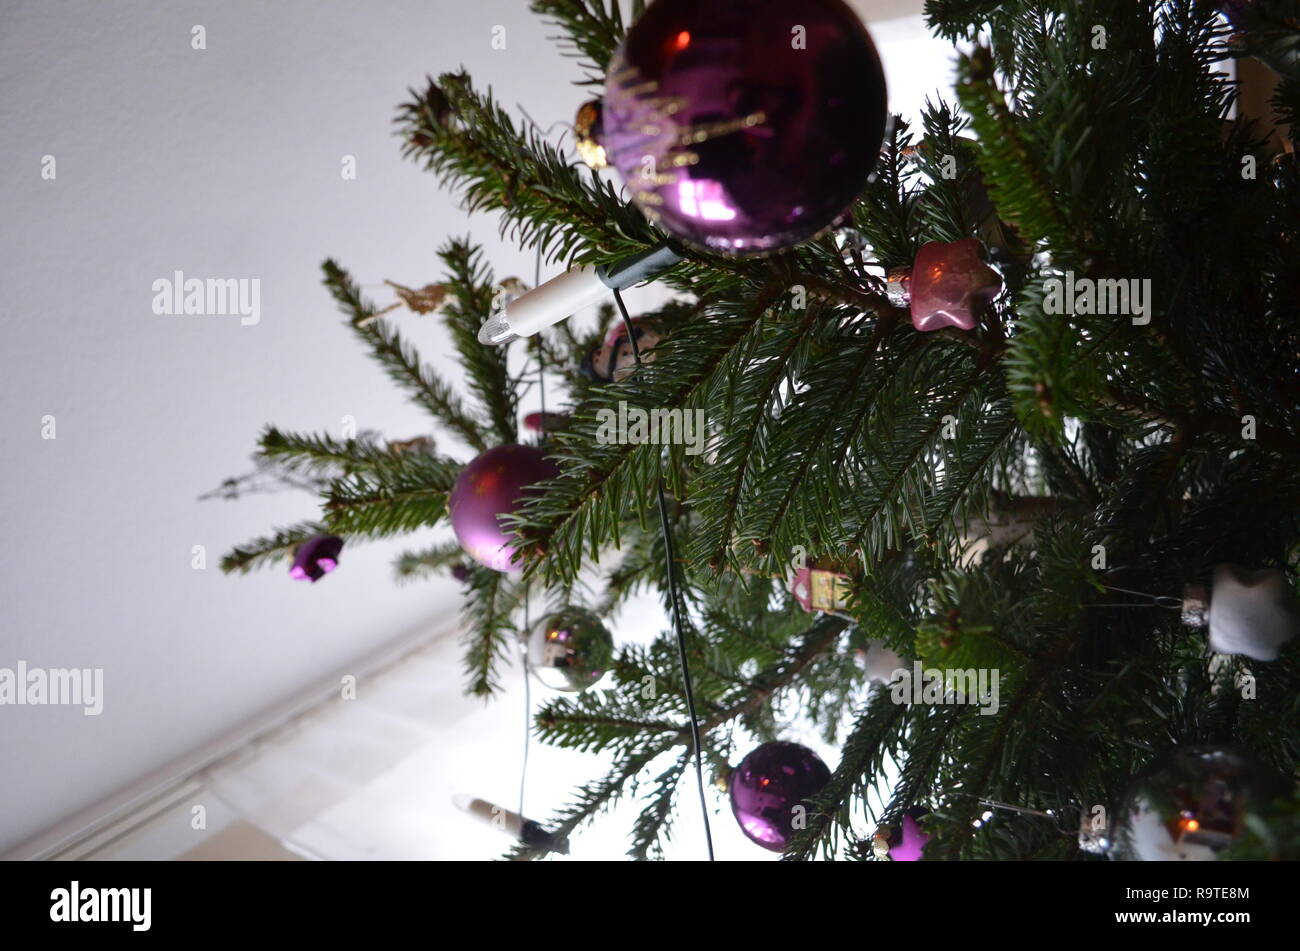 Christmas tree with decoration and ornaments shot from below, amazing perspective Stock Photo